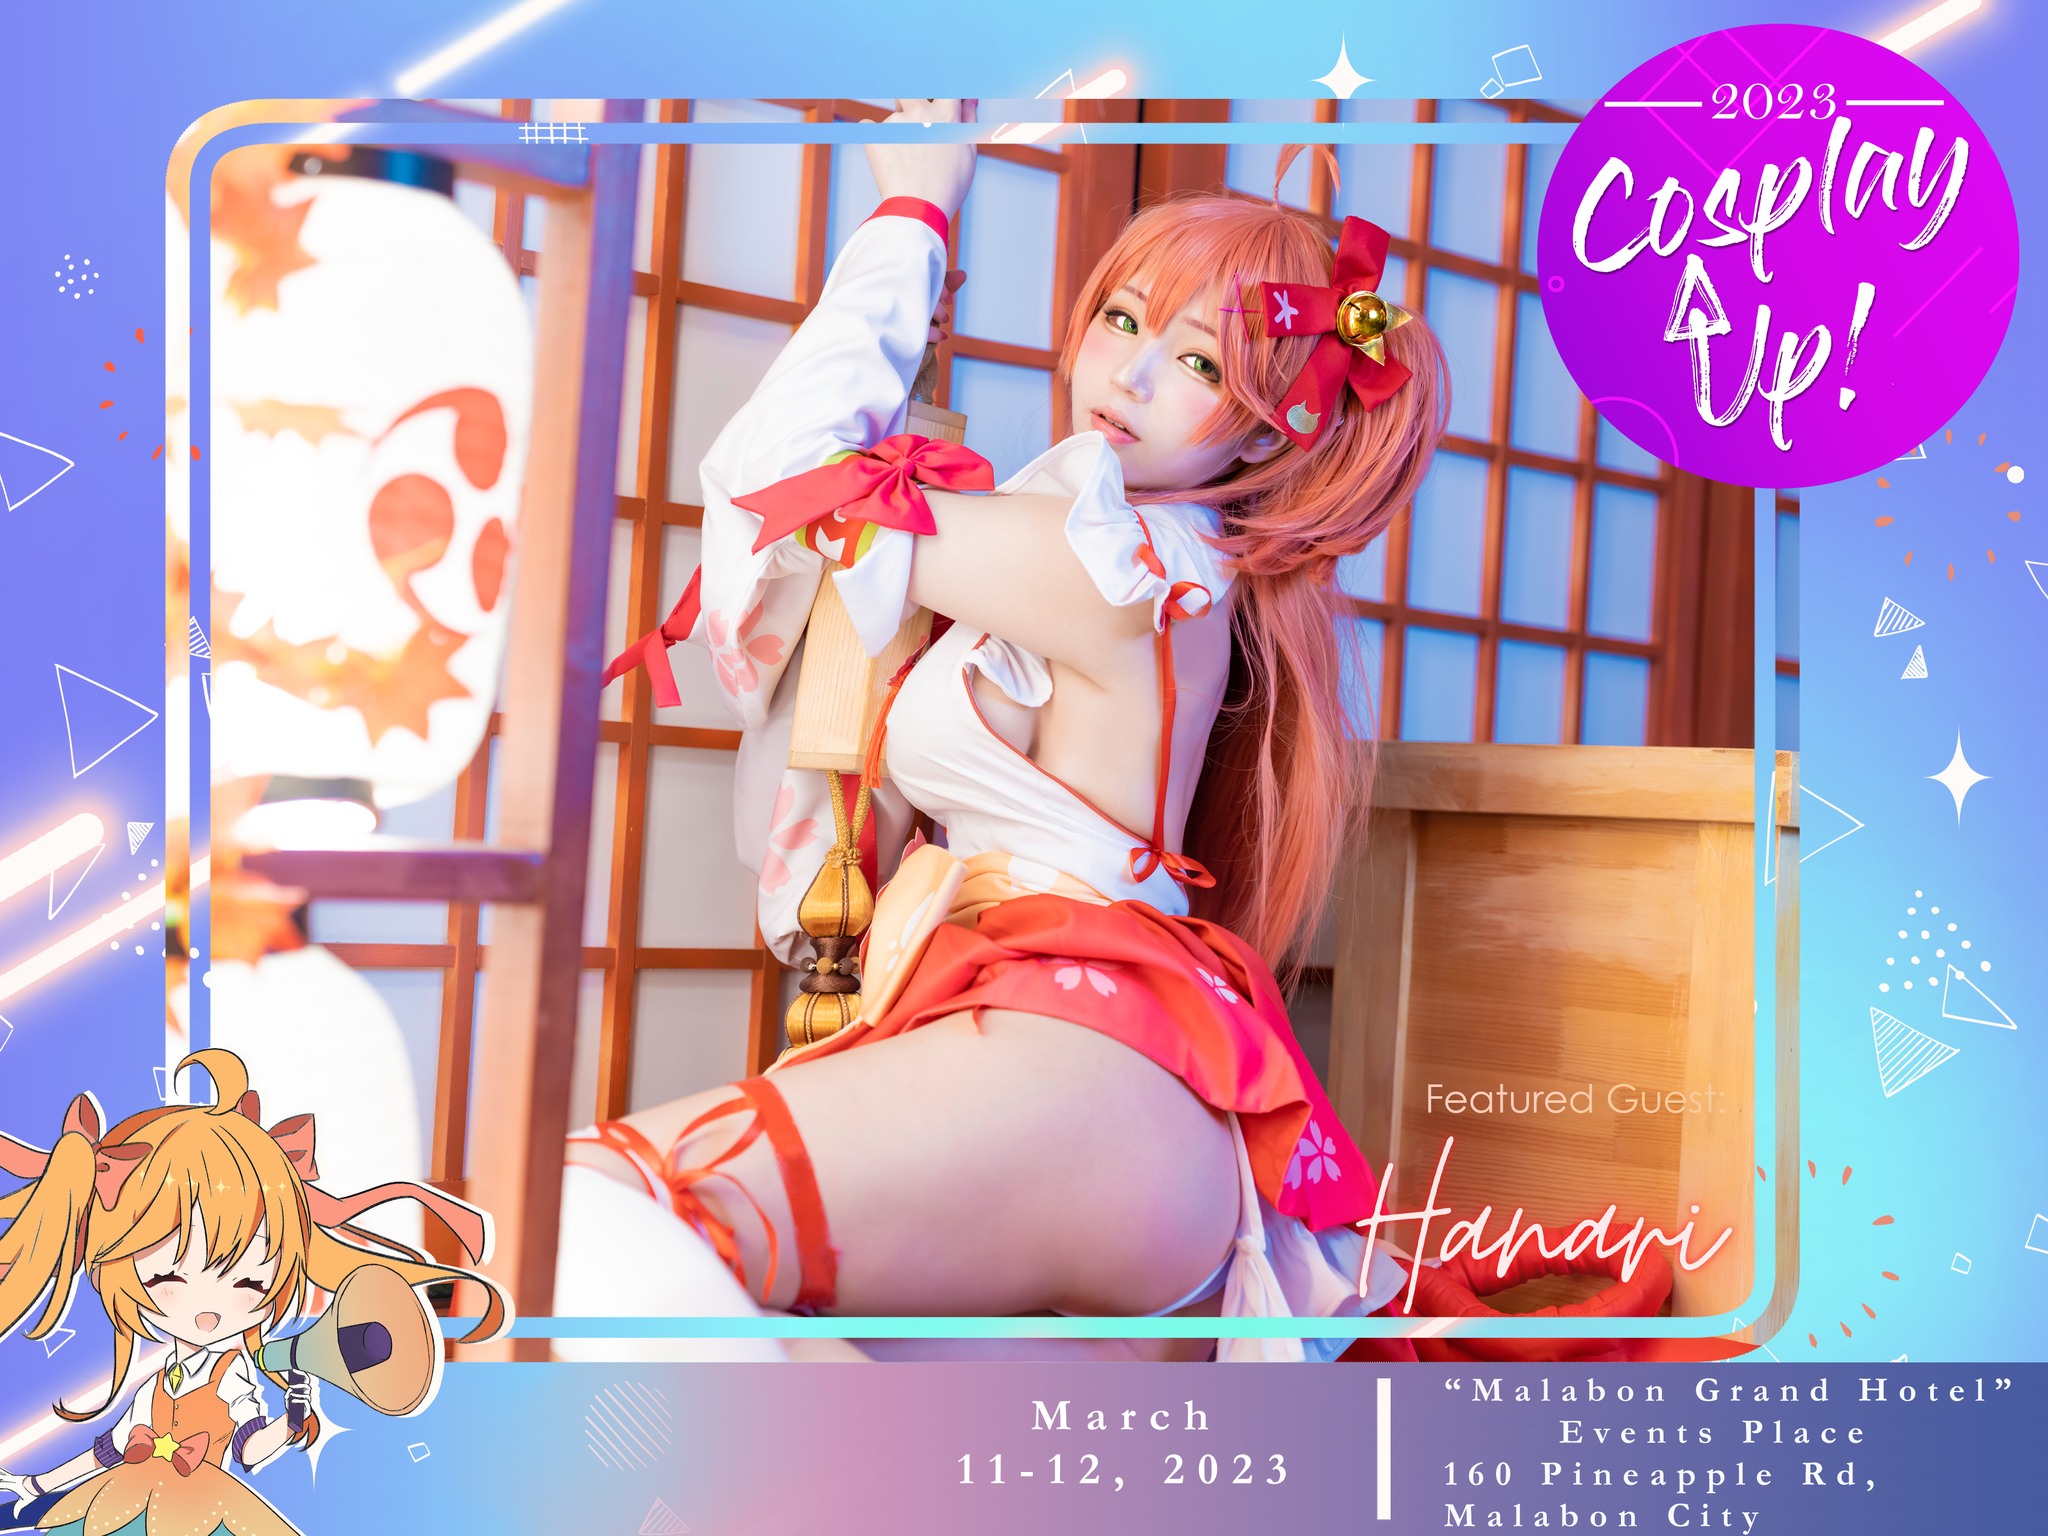 Join Cosplay Up! 2023 this March 11-12